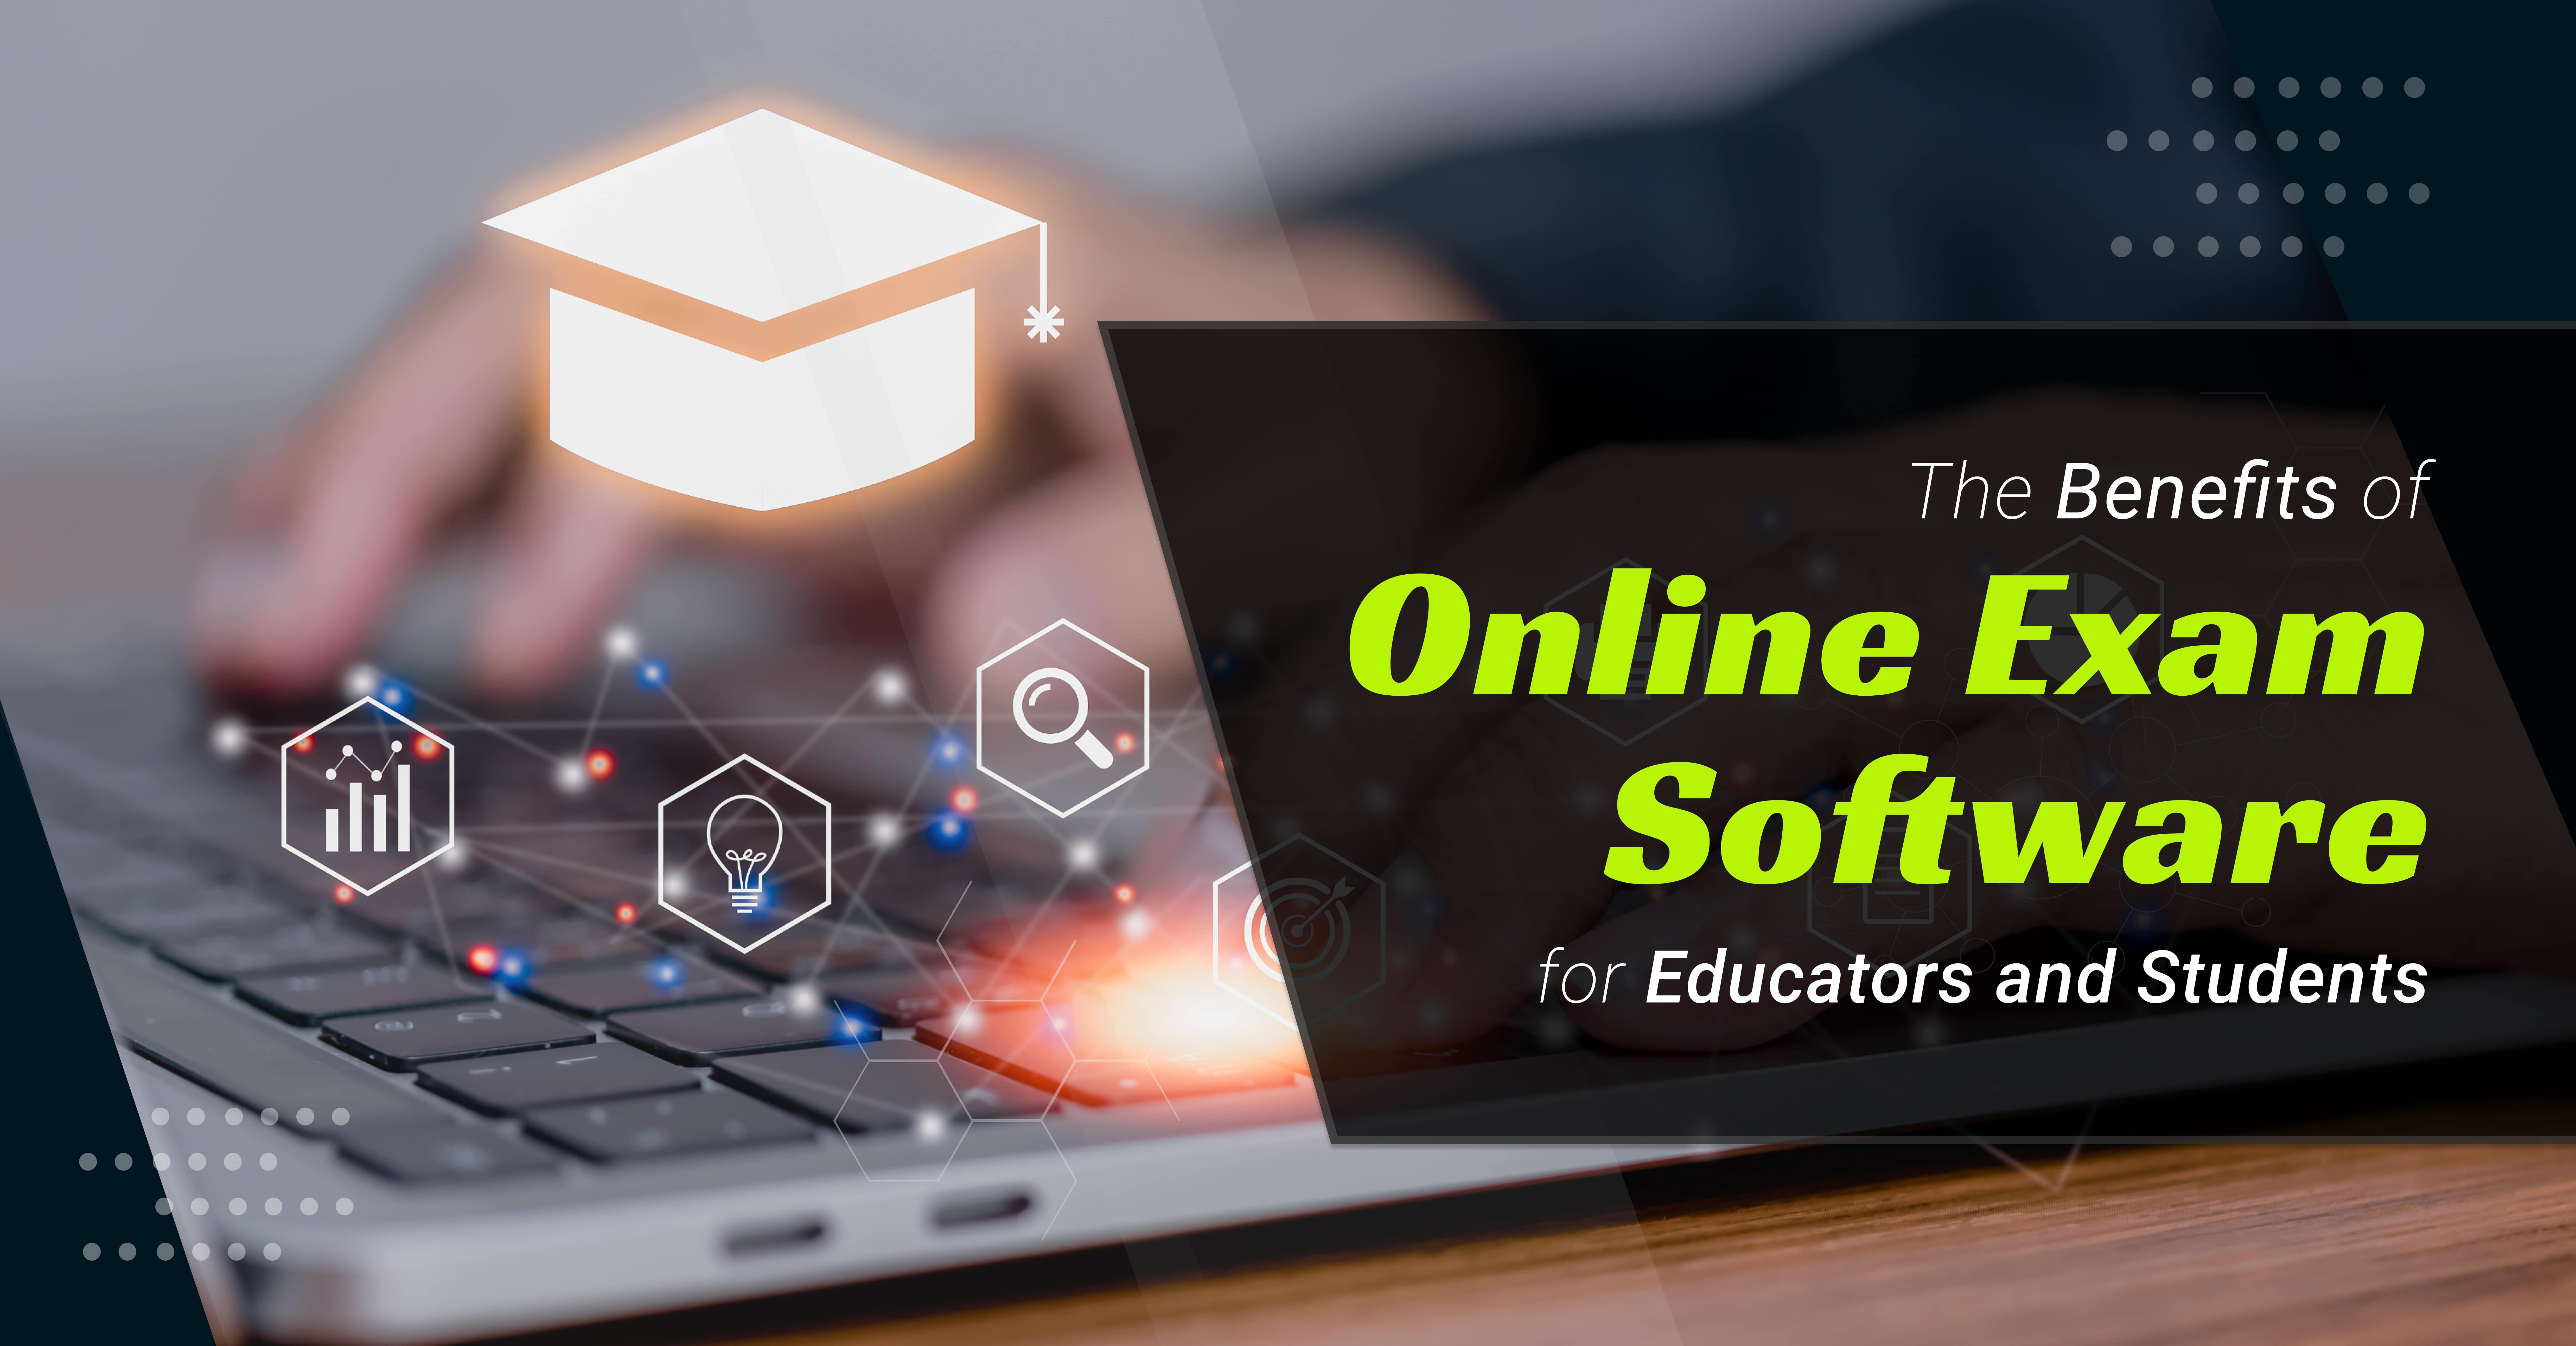 The Benefits of Online Exam Software for Educators and Students